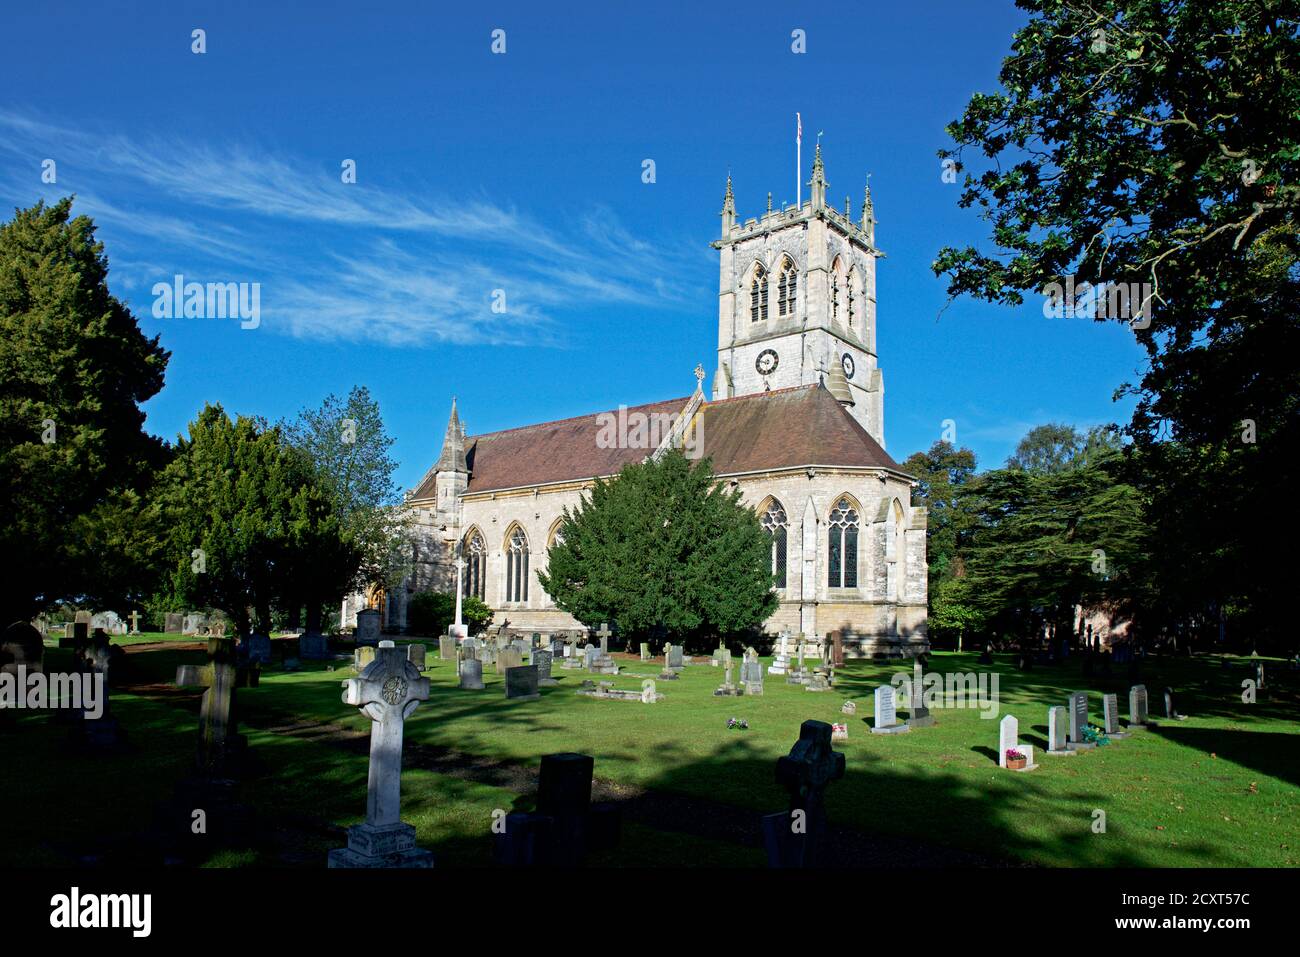 St Helen's Church in the village of Escrick, North Yorkshire, England UK Stock Photo